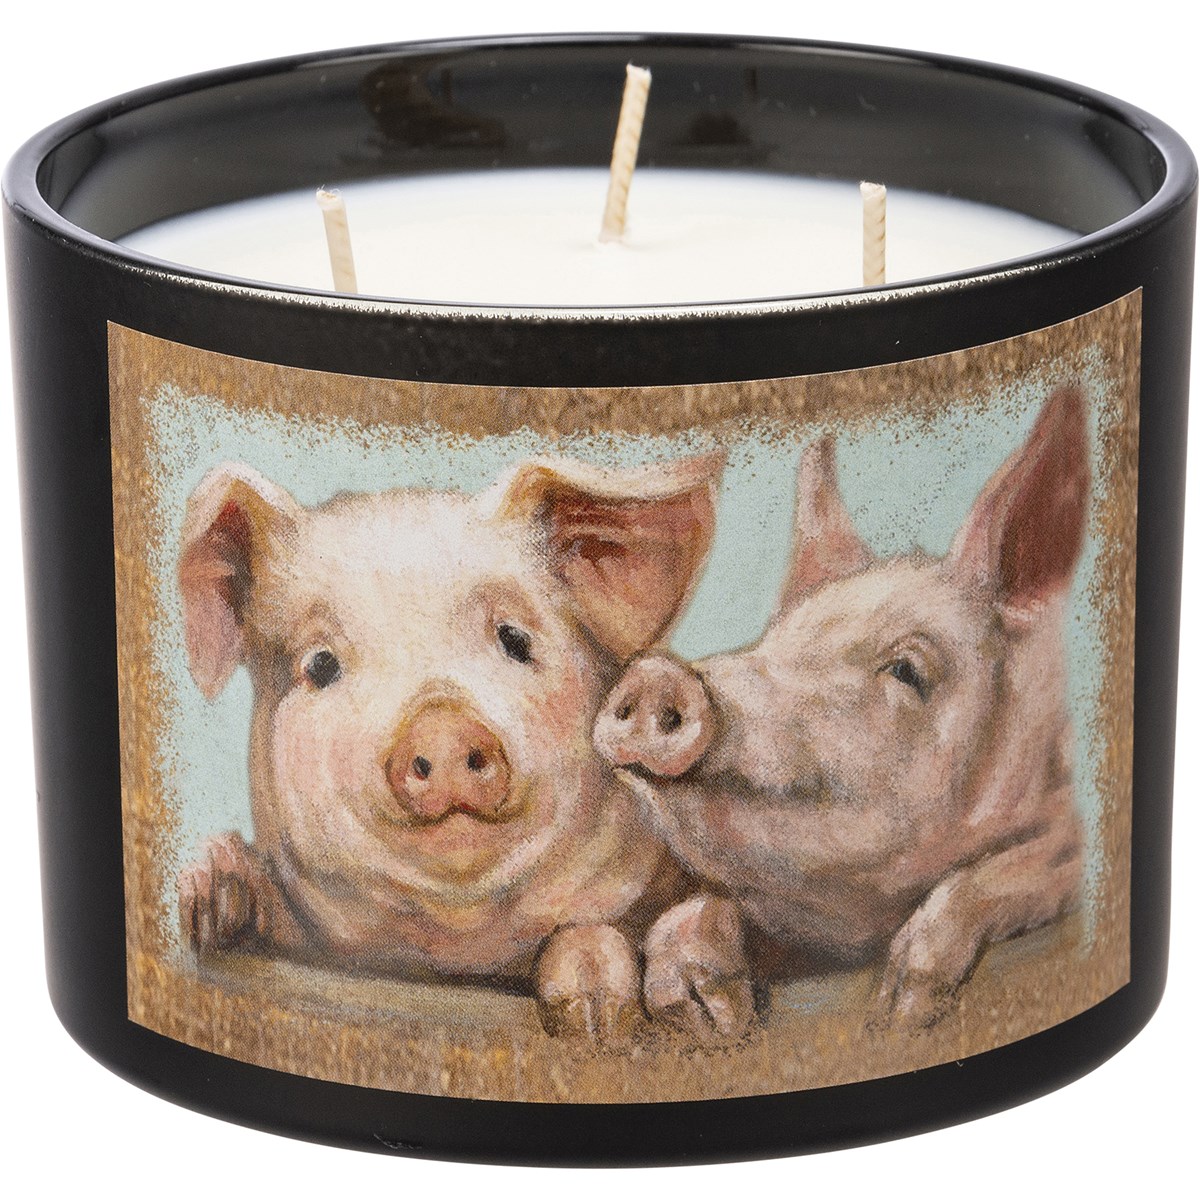 Pigs Jar Candle - Soy Wax, Glass, Cotton